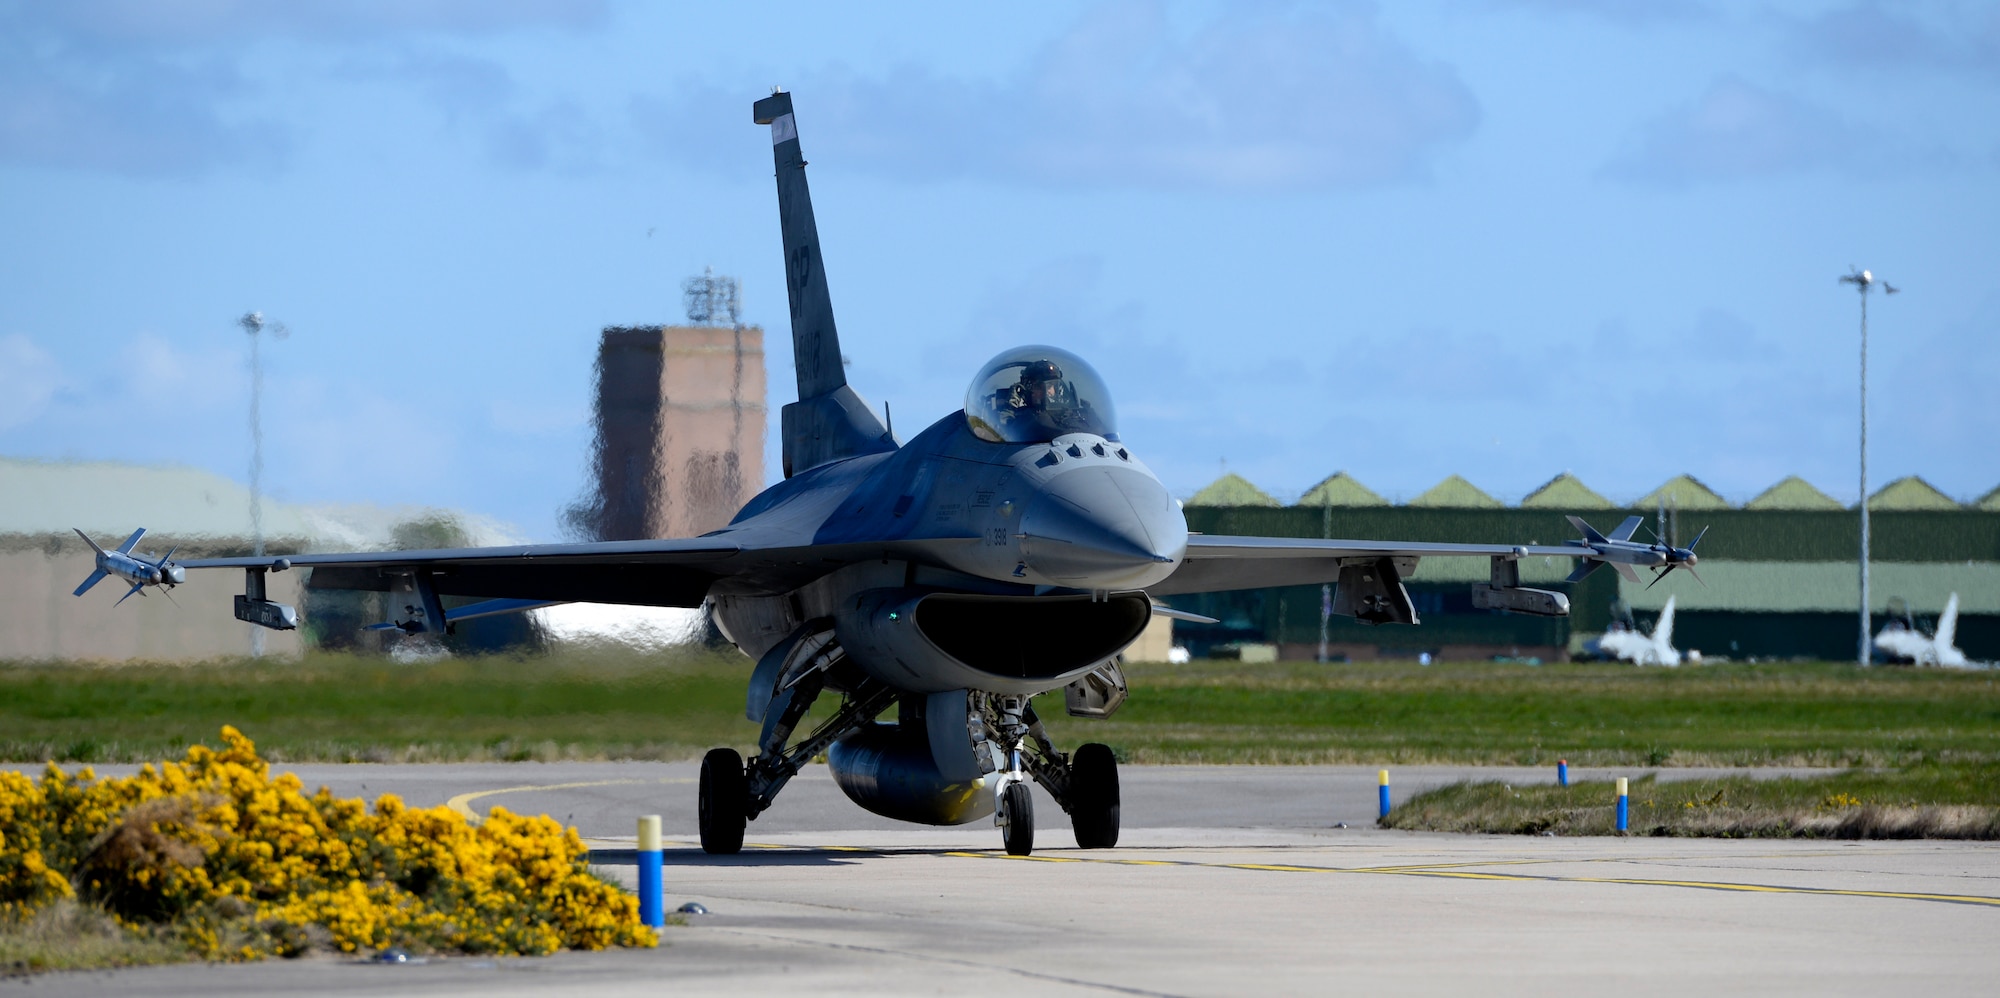 An F-16 Fighting Falcon from the 480th Fighter Squadron, 52nd Fighter Wing, Spangdahlem Air Base, Germany, taxis after a low-level training sortie at RAF Lossiemouth, Scotland, May 7, 2019, during exercise Formidable Shield. Formidable Shield is a U.S.-led exercise, conducted by Naval Striking and Support Forces NATO. The purpose of the training is to improve allied interoperability in a live-fire integrated air and missile defense exercise. (U.S. Air Force photo by Master Sgt. Austin M. May)